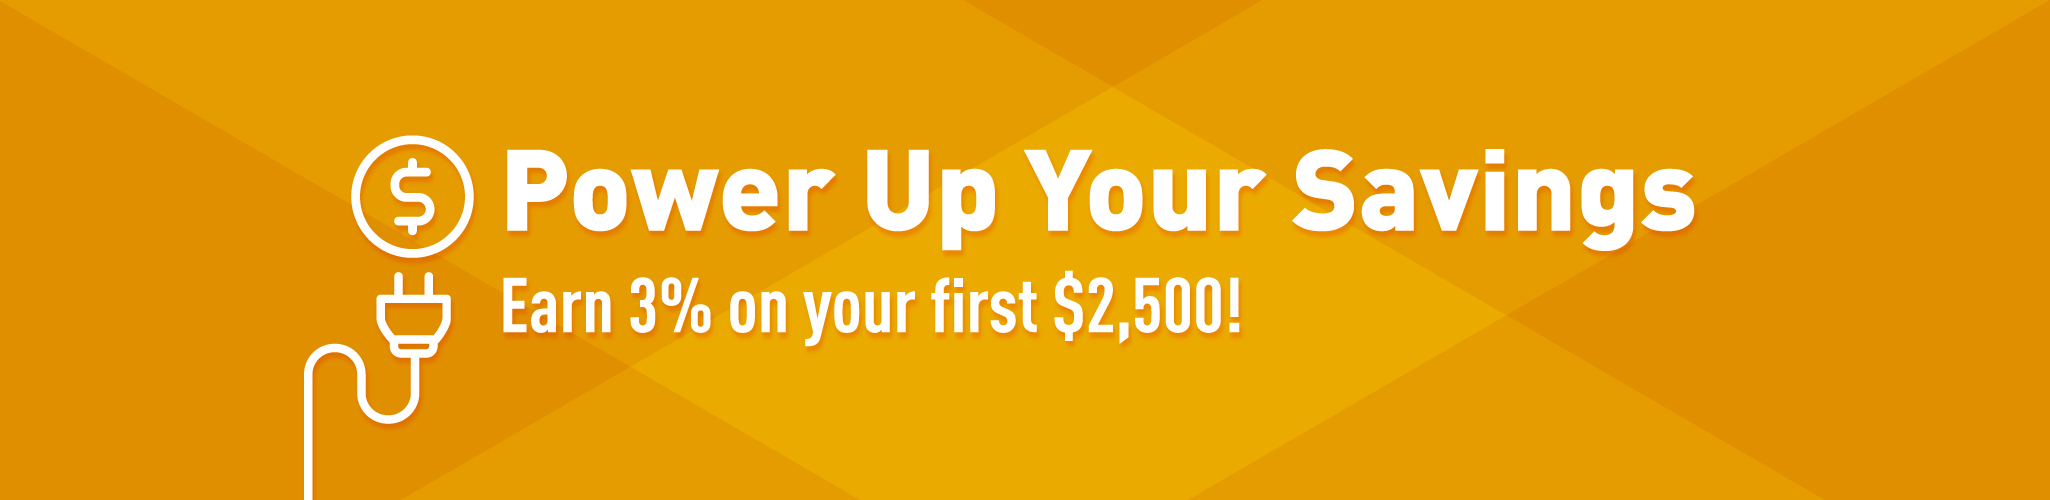 Power Up Your Savings. Earn 3% on your first $2,500!